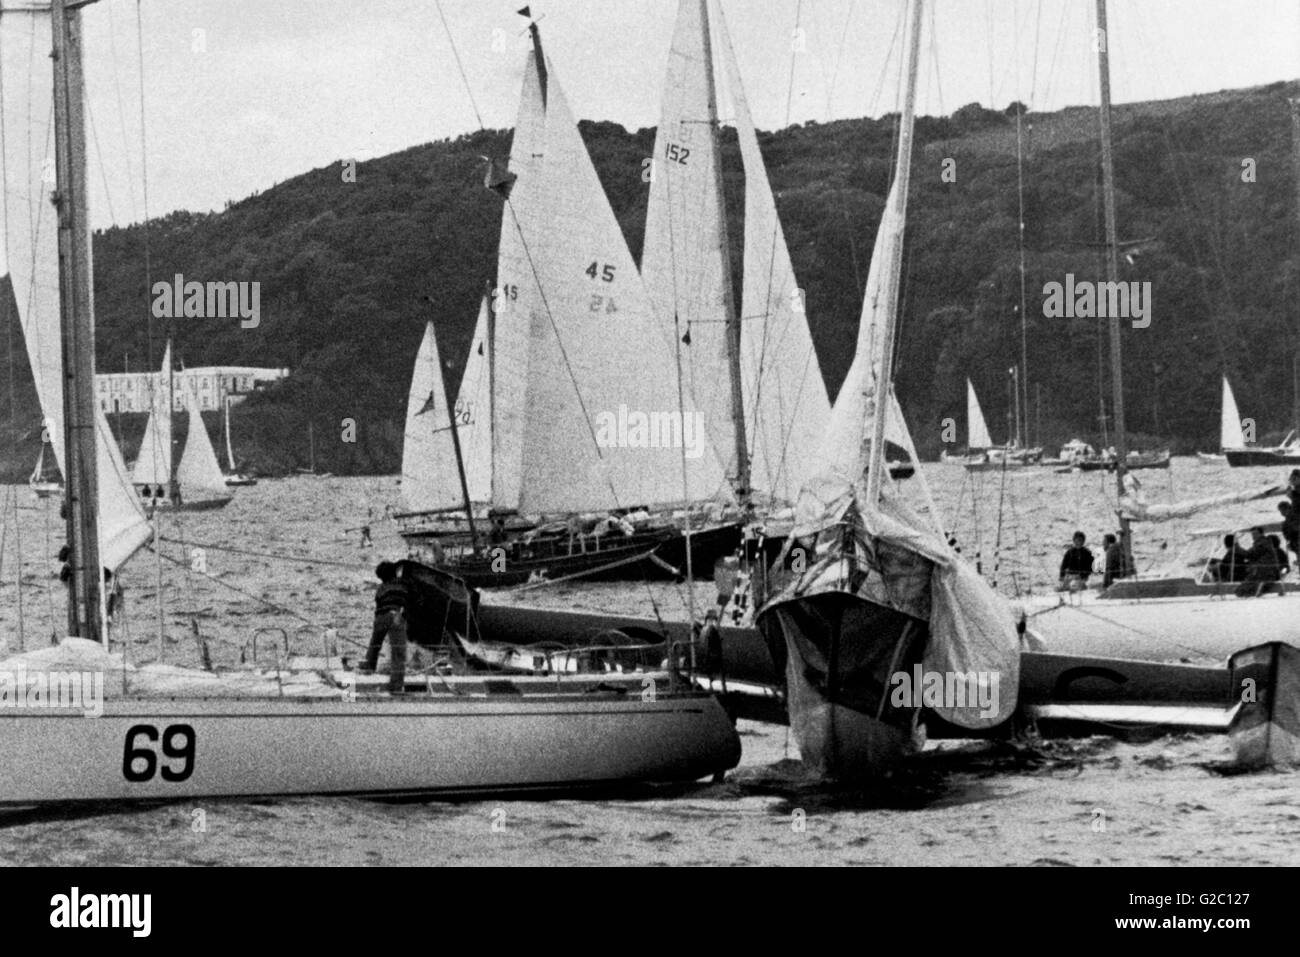 AJAXNETPHOTO. 7TH JUNE, 1980. PLYMOUTH, ENGLAND. - OSTAR 1980 - KRITER VII SKIPPERED BY TOM GROSSMAN (USA) IN COLLISION WITH GARUDA, SKIPPERED BY VICTOR SAGI (ESP)  JUST BEFORE THE START. PHOTO:TONY CARNEY/AJAX  REF:KRITER VII 1980 01 Stock Photo